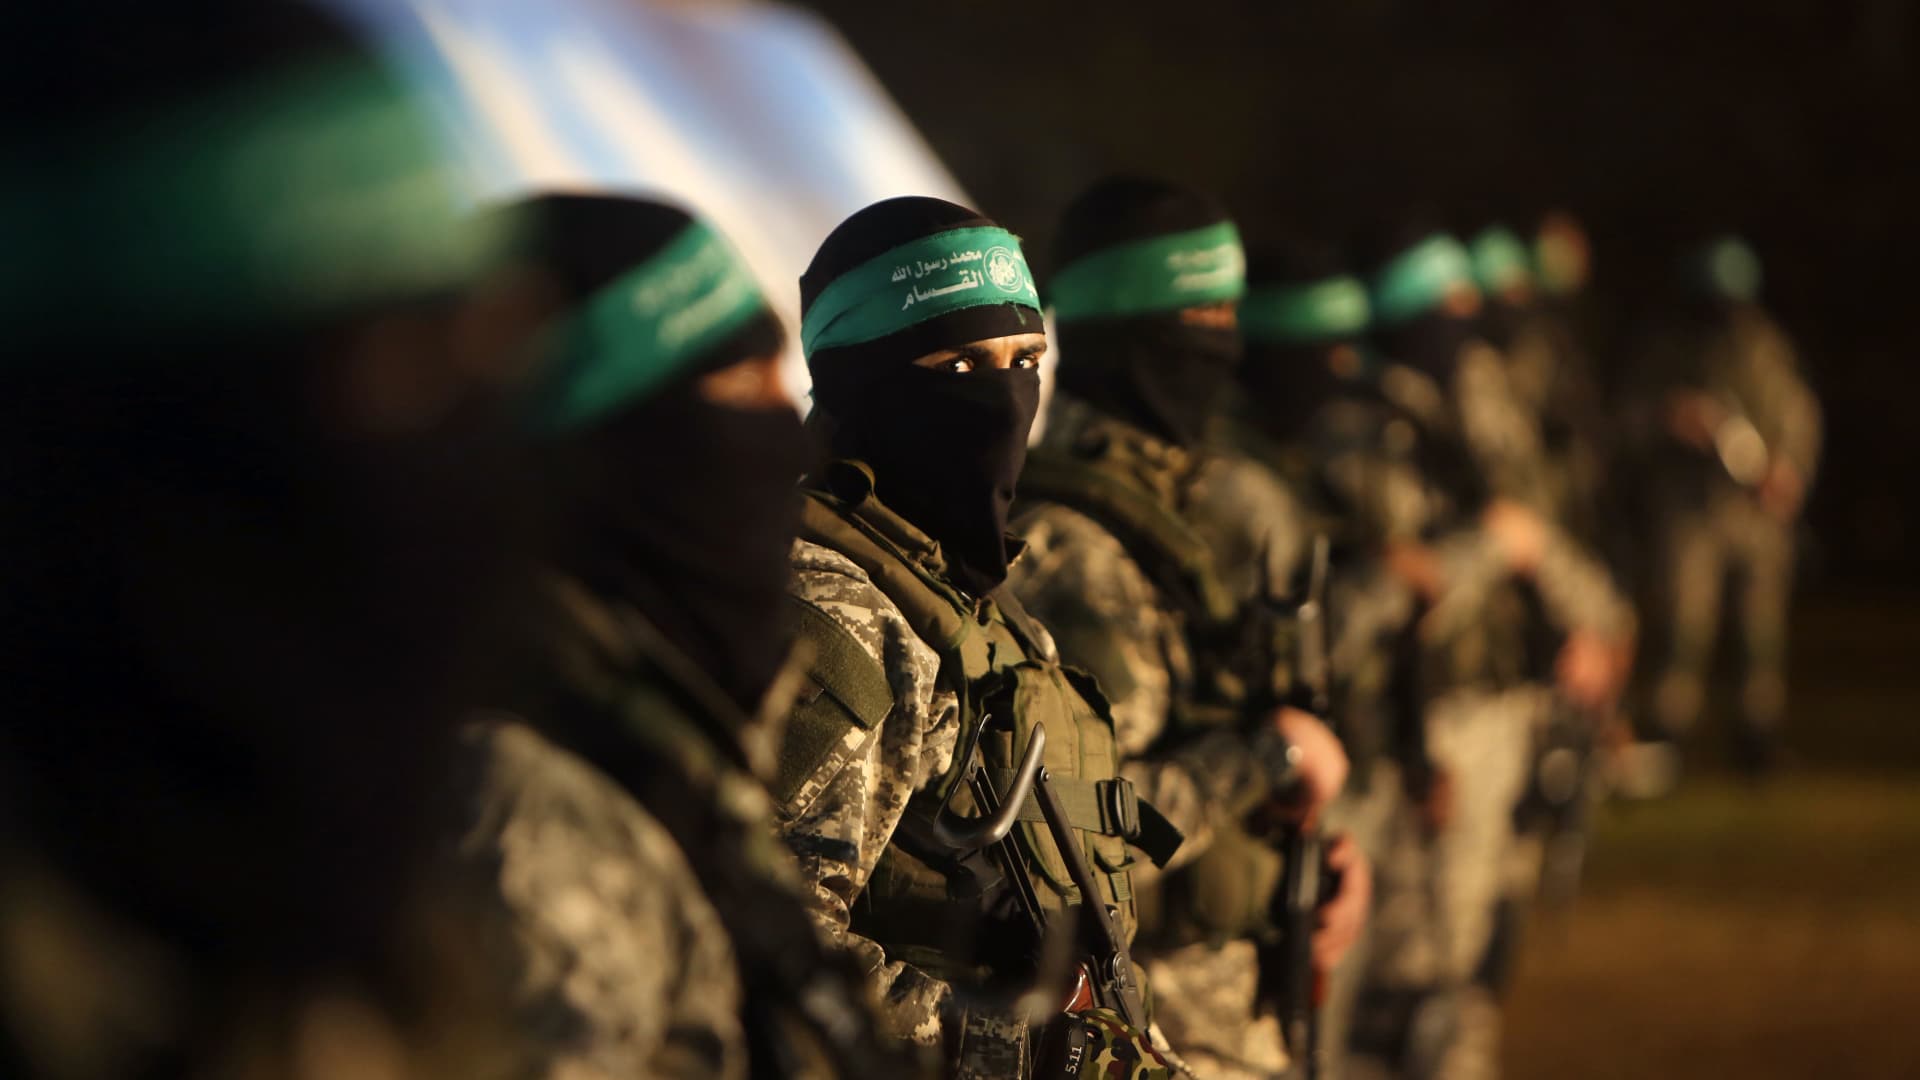 Palestinian members of the al-Qassam Brigades, the armed wing of the Hamas movement, take part in a gathering on January 31, 2016 in Gaza city to pay tribute to their fellow militants who died after a tunnel collapsed in the Gaza Strip.